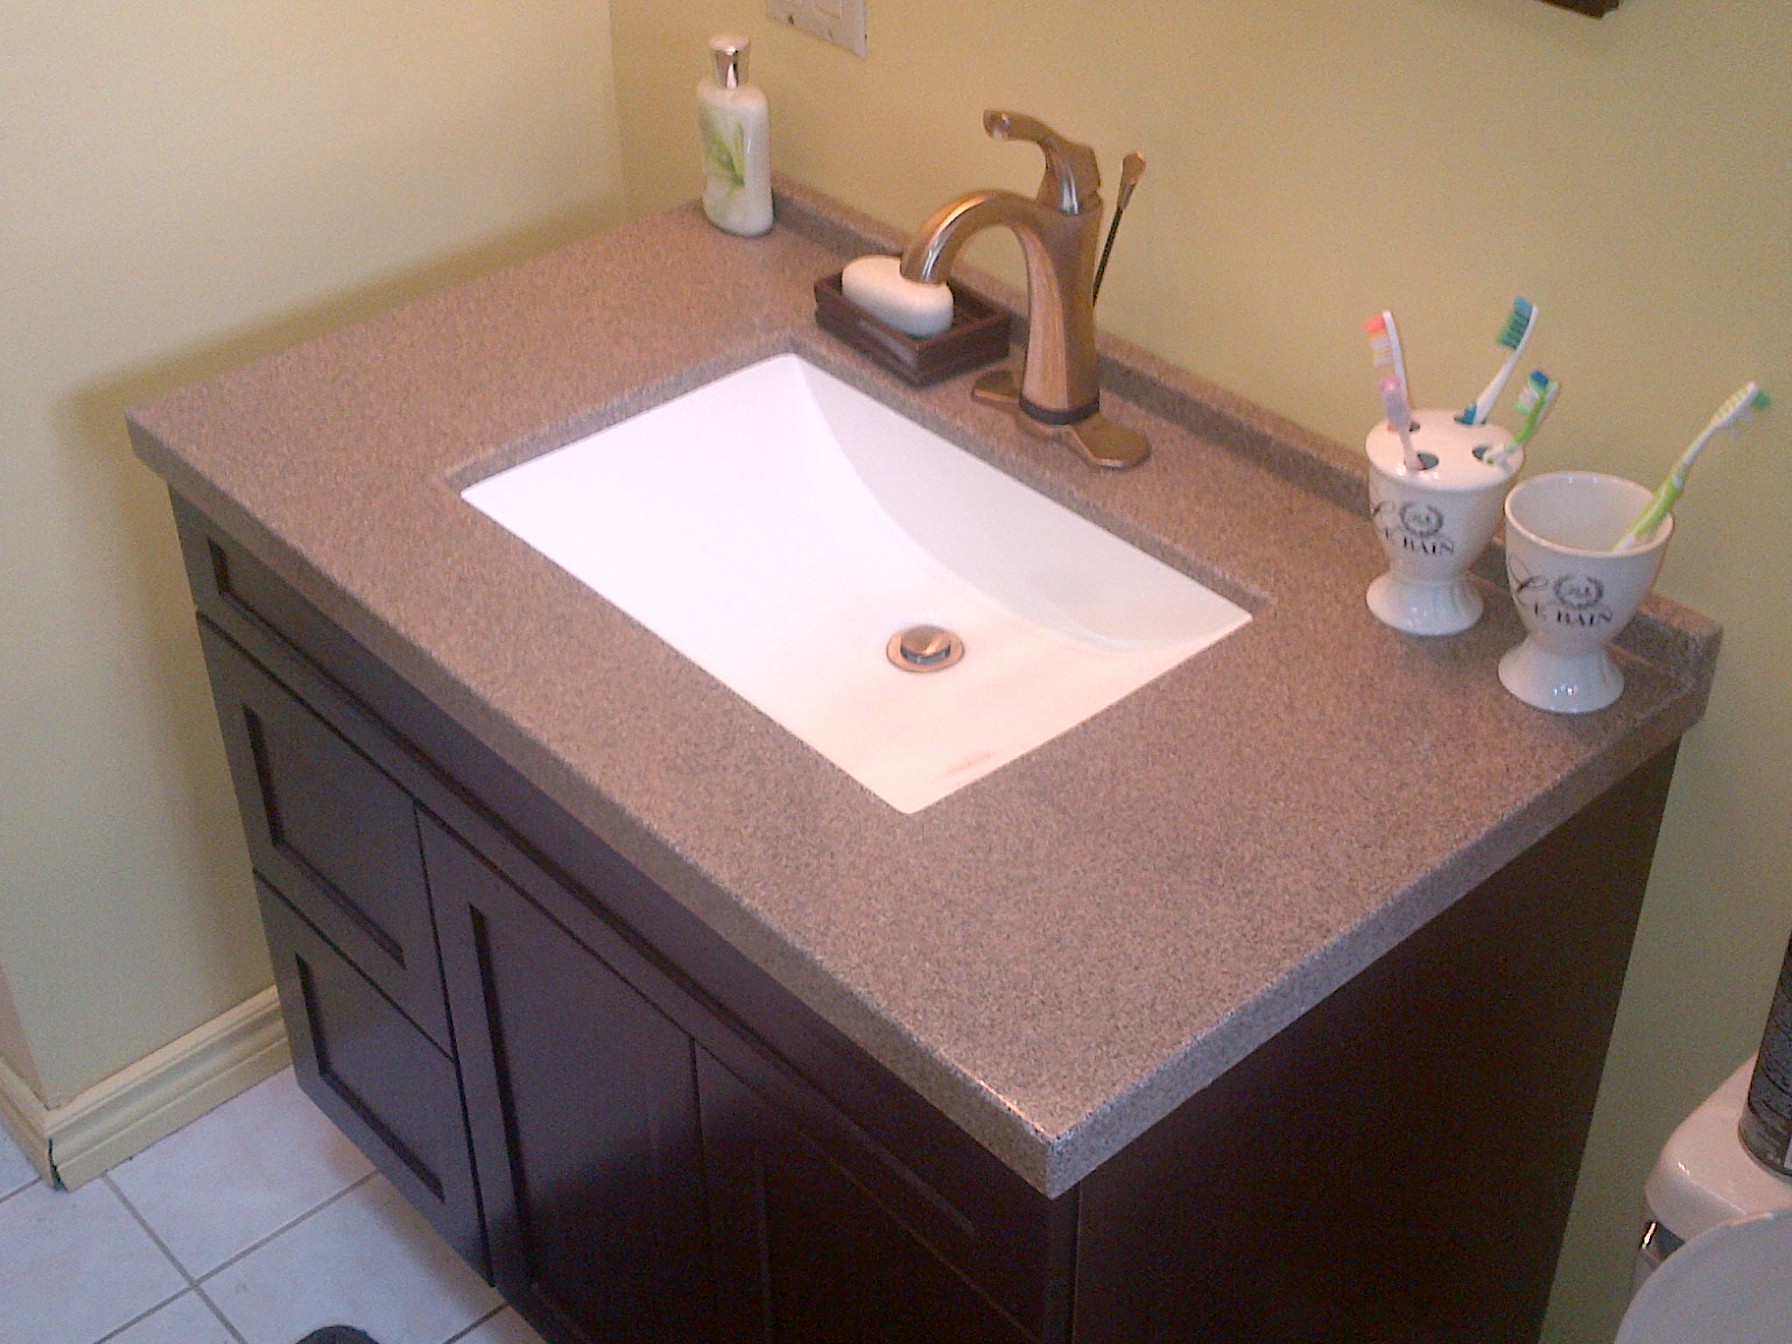 My washroom is a pleasant place to visit with my new Addison single handle lavatory faucet